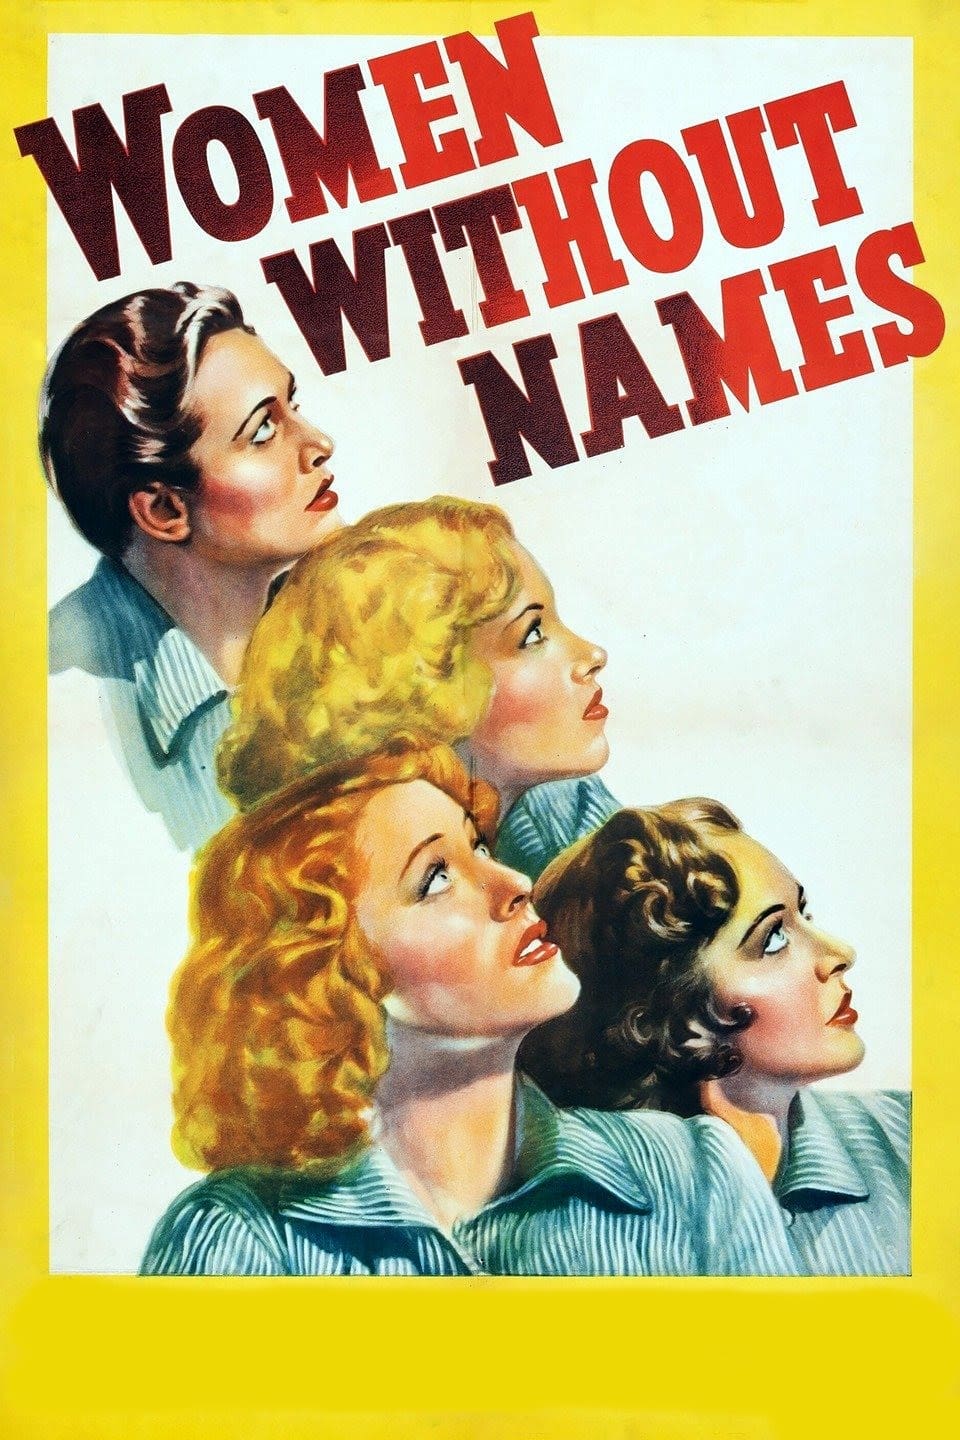 Women Without Names